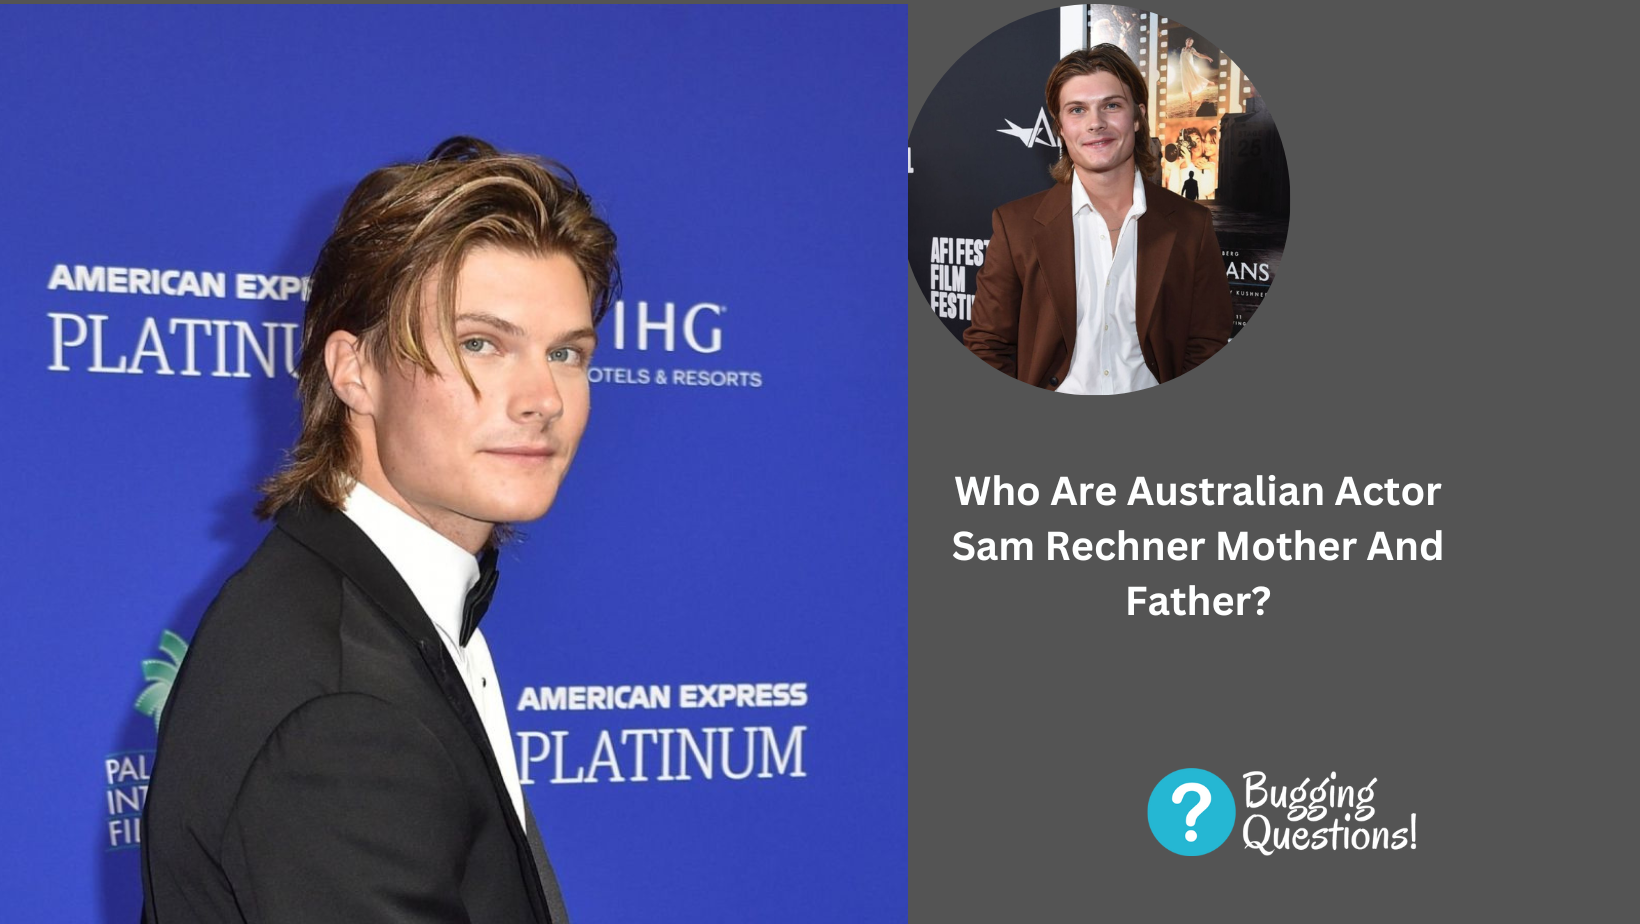 Who Are Australian Actor Sam Rechner Mother And Father?